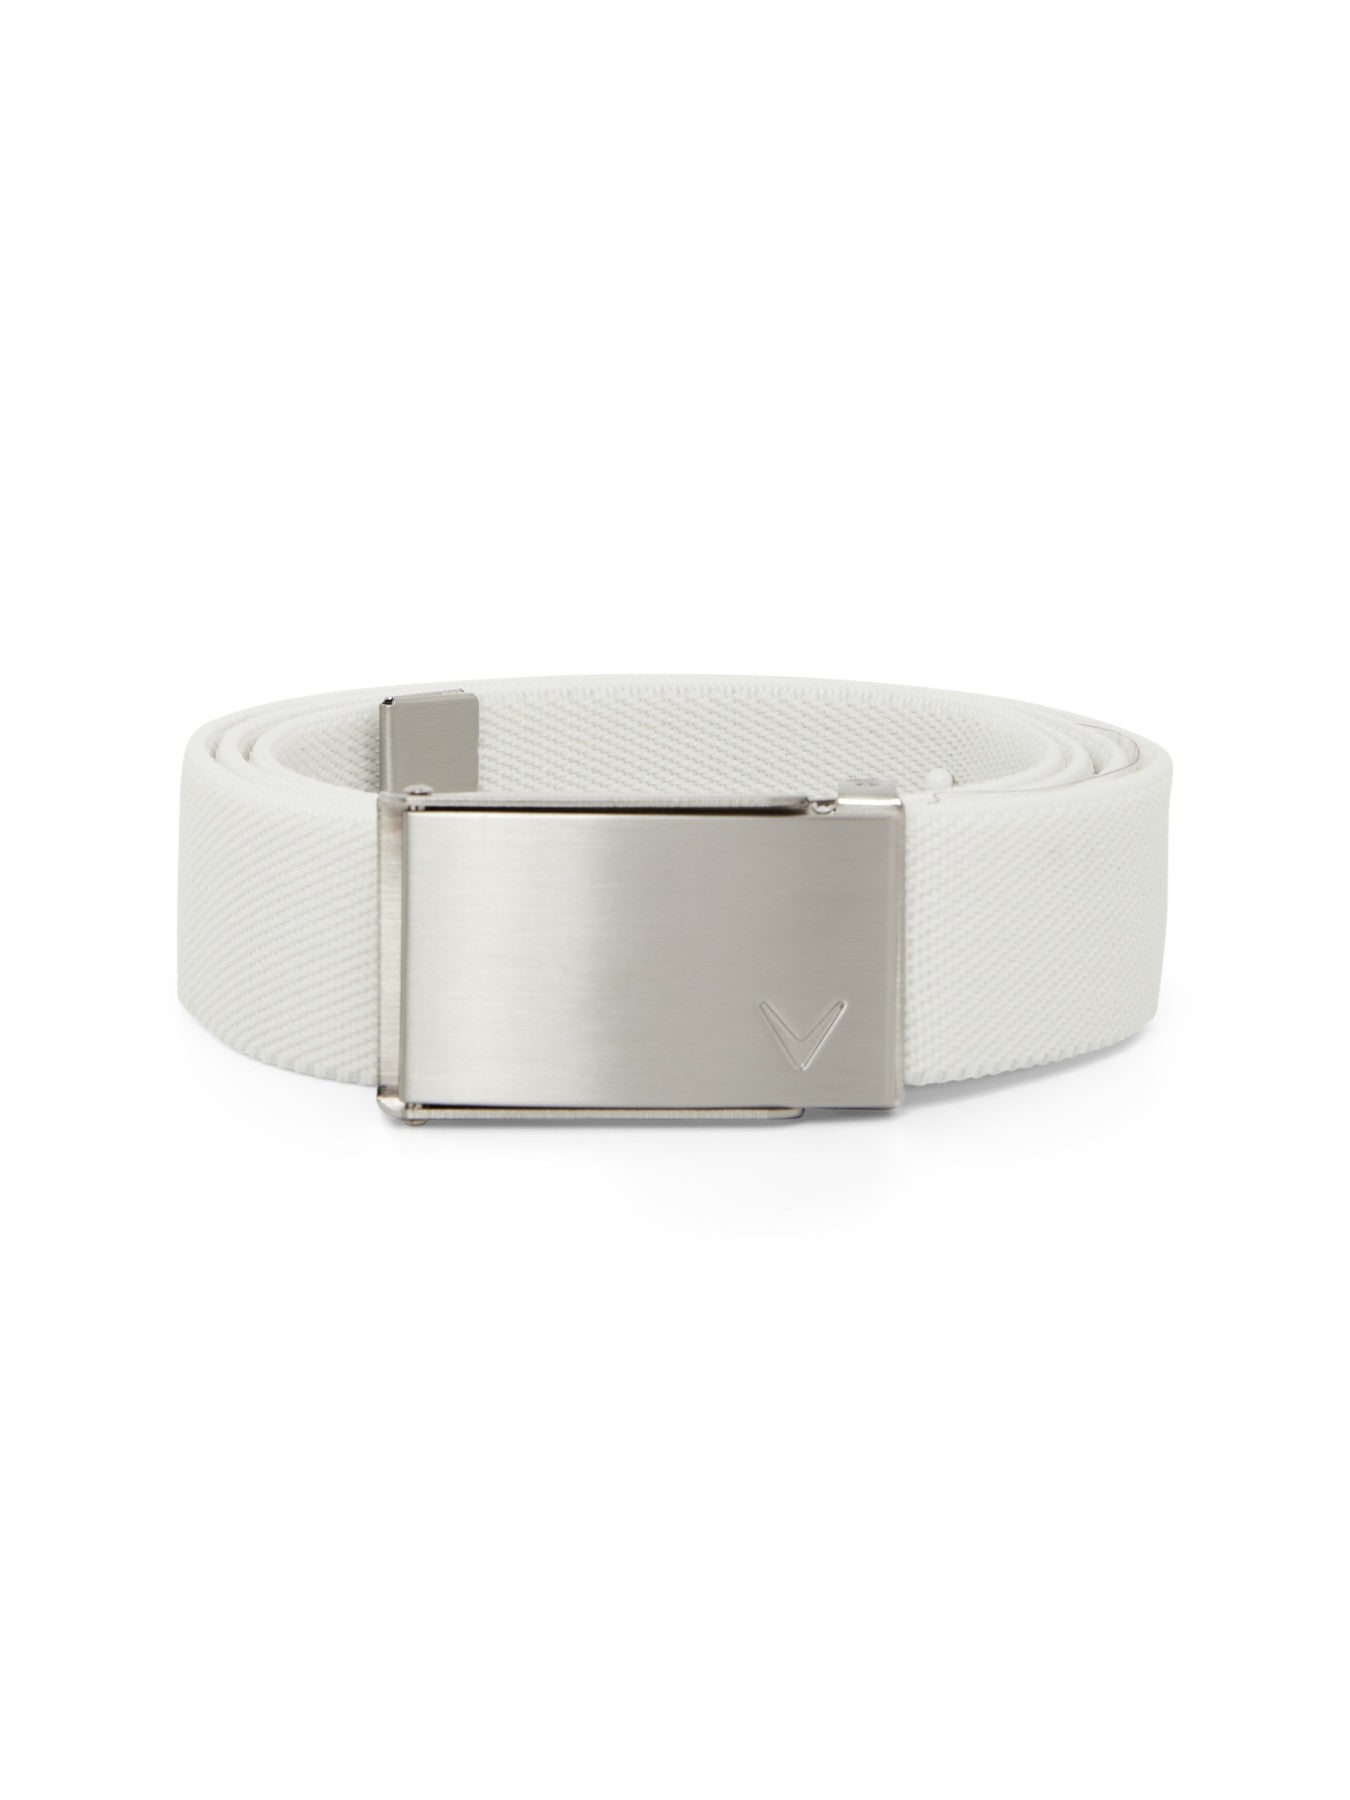 View Womens Cut To Fit Stretch Belt In Bright White information